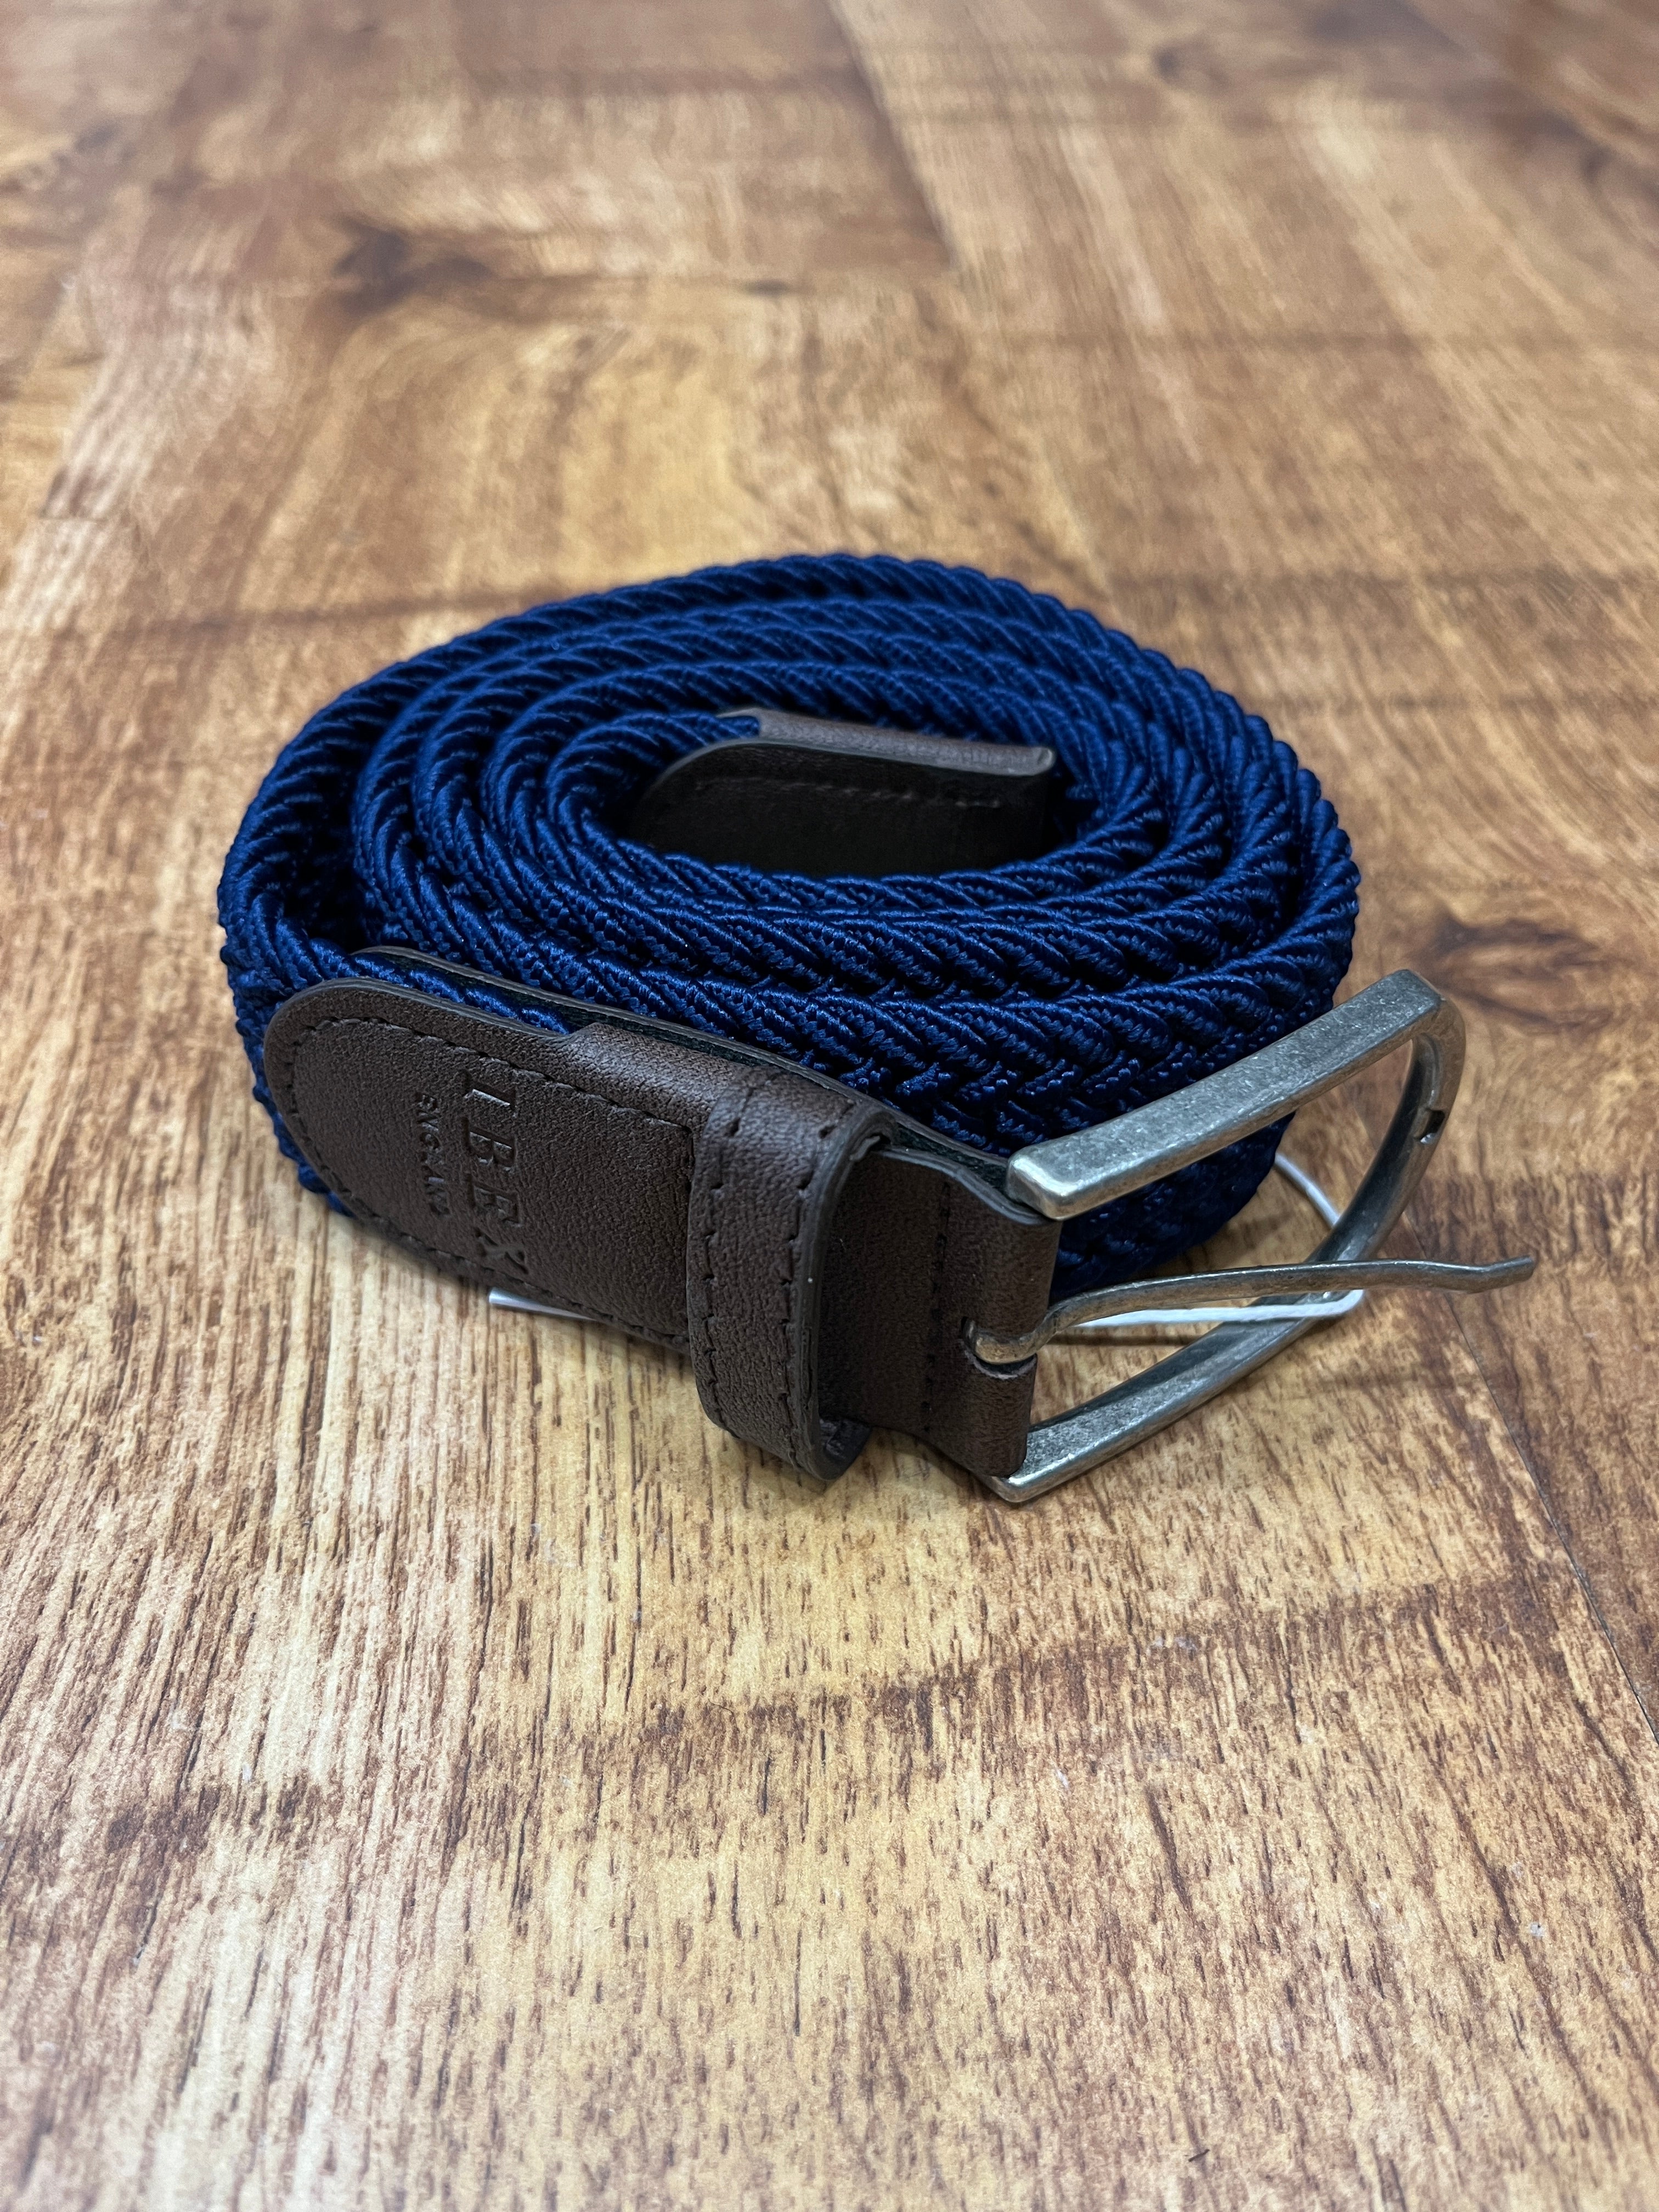 NAVY WOVEN BELT FROM OXFORD LEATHER CRAFT